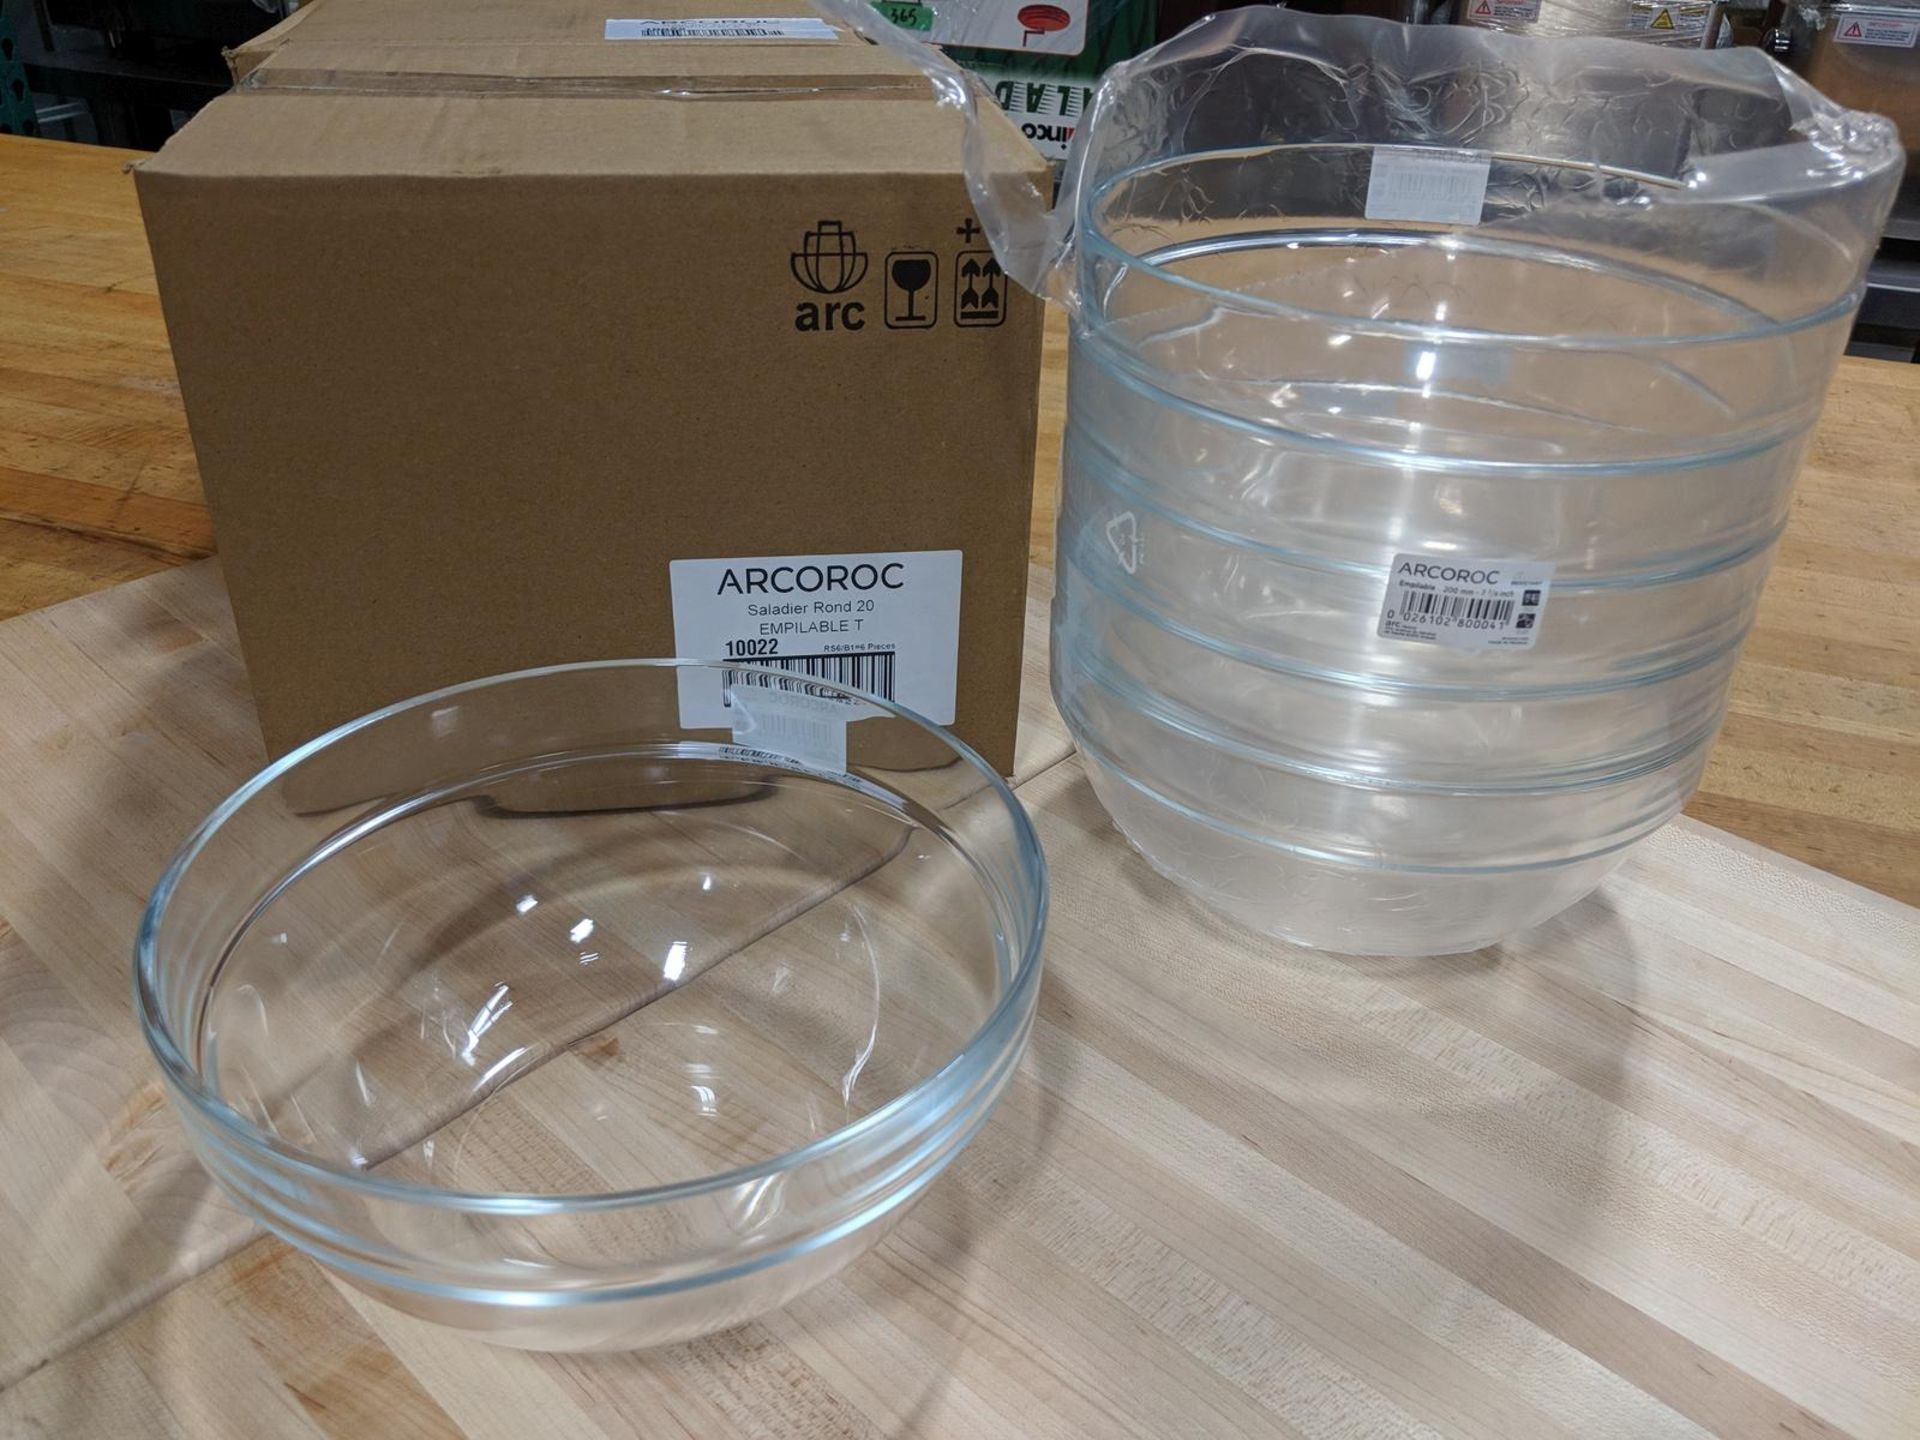 8" Clear Glass Stacking Salad Bowls, 64oz/1.9L - Lot of 12 (2 Cases), Arcoroc 10022